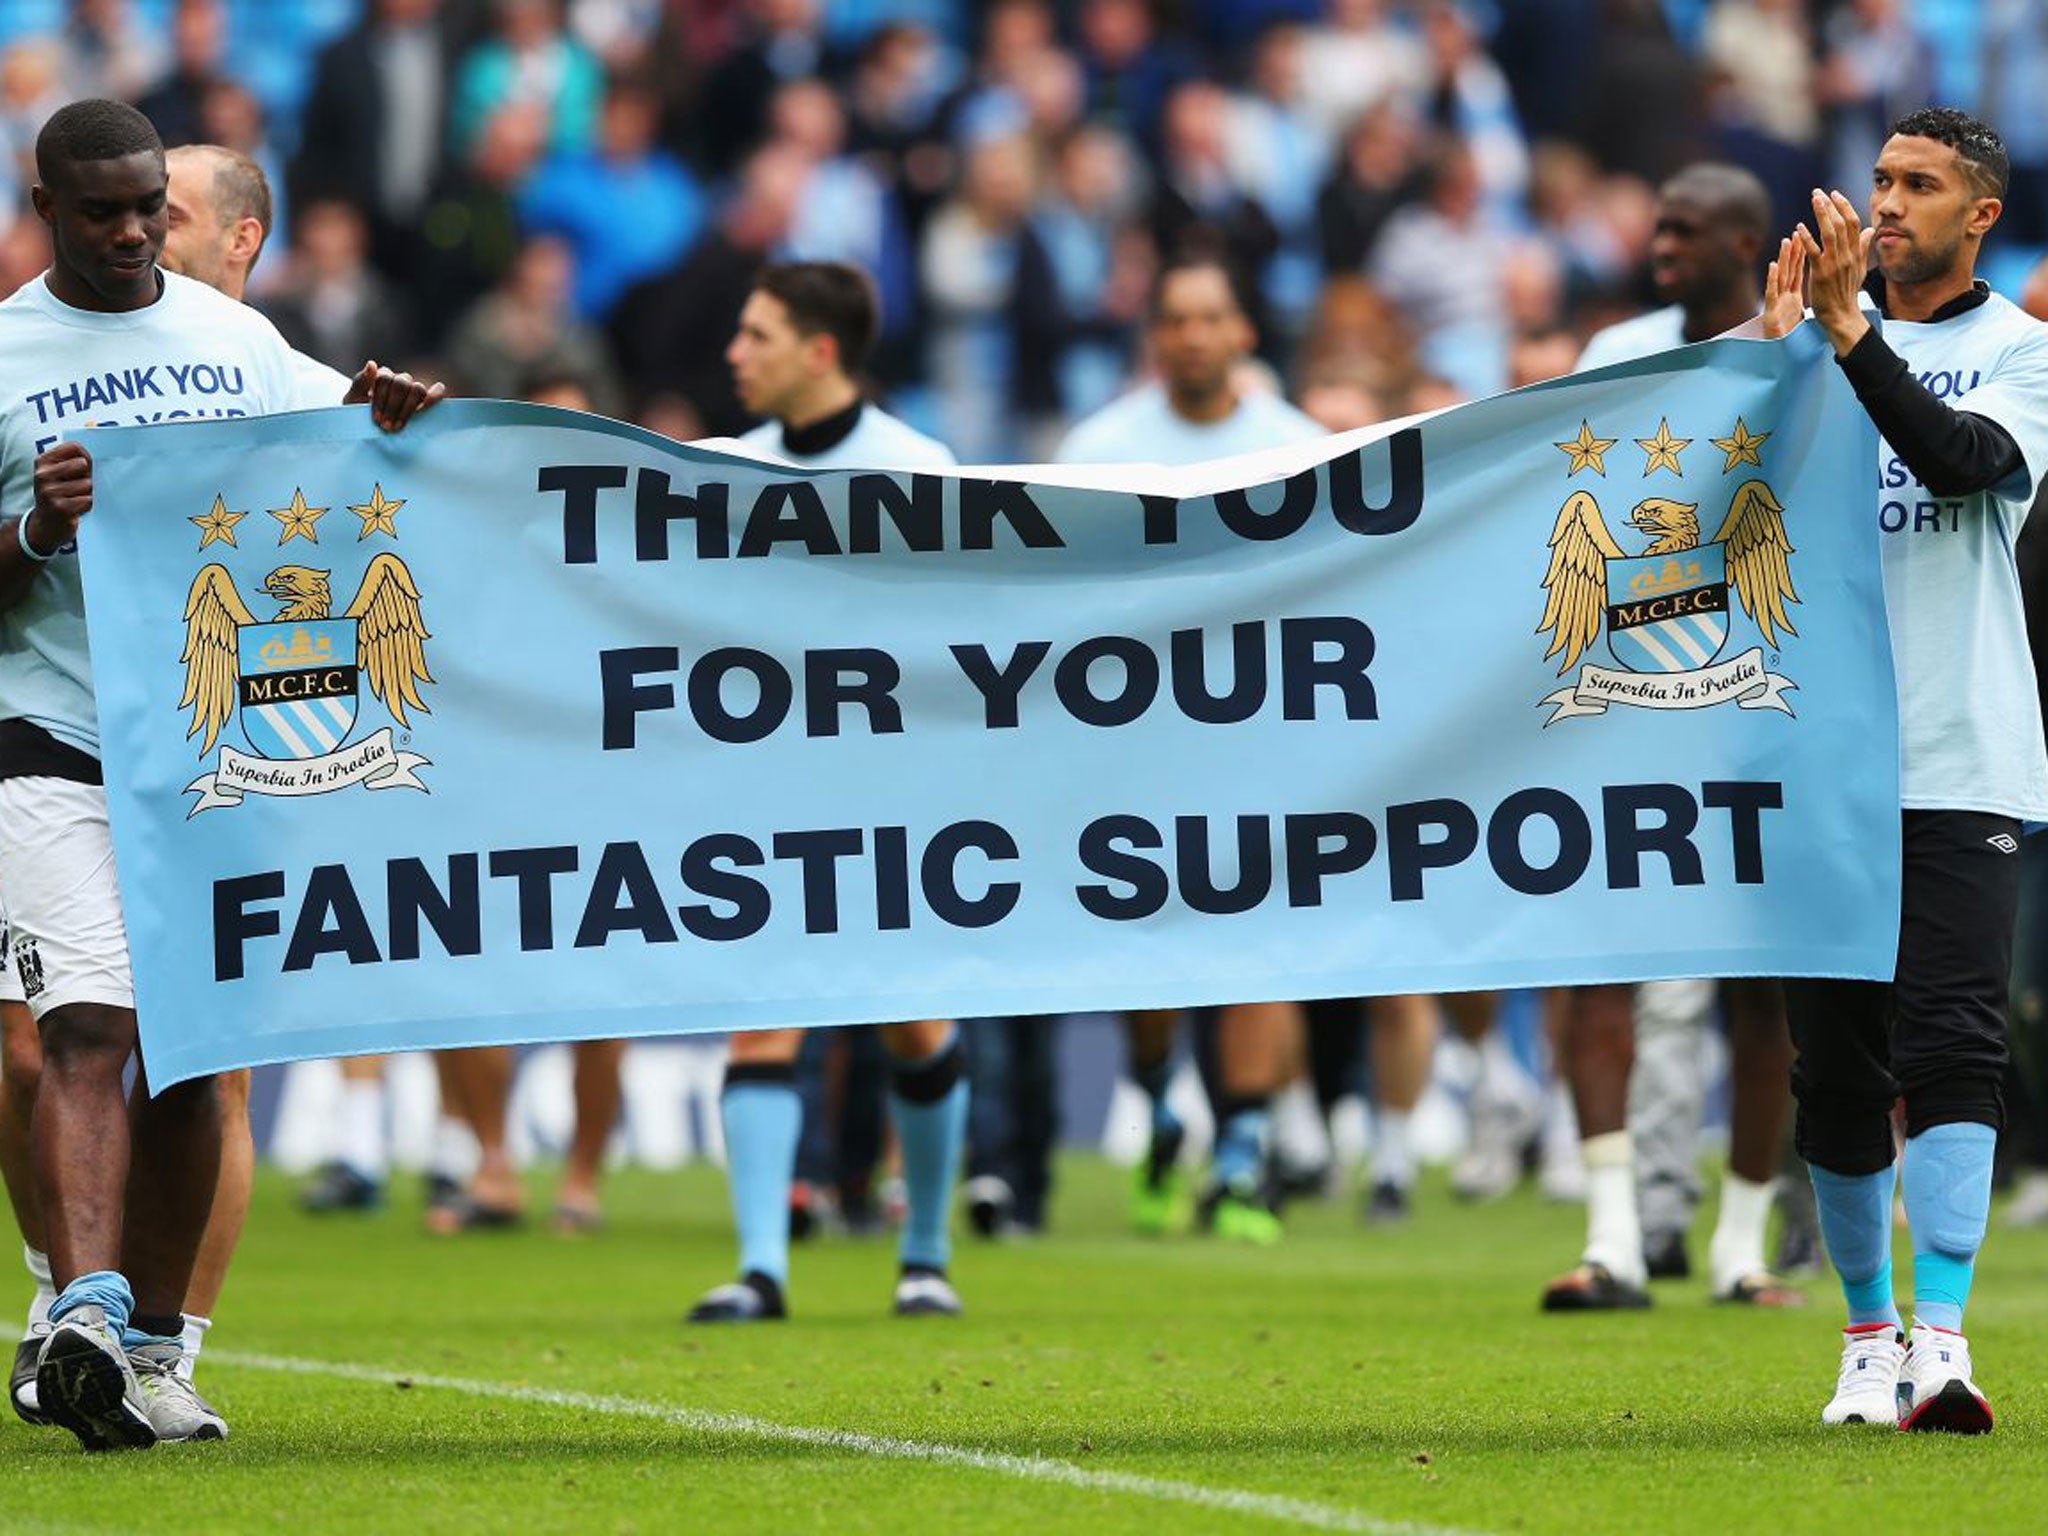 Micah Richards, left, Gael Clichy, right, and the rest of the Manchester City players thank their fans for their support